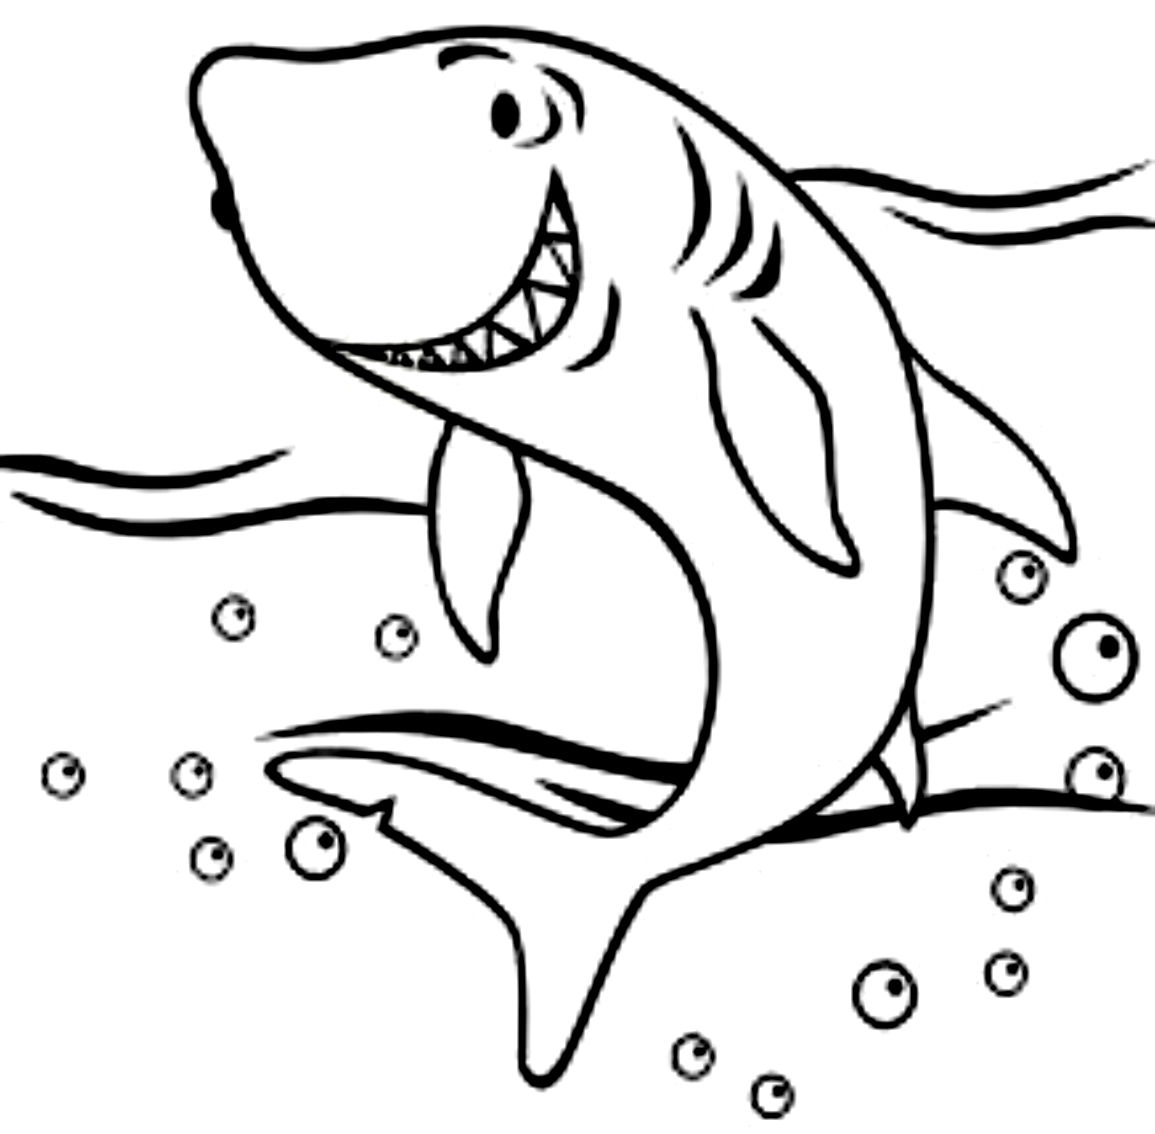 Drawing 19 of sharks to print and color